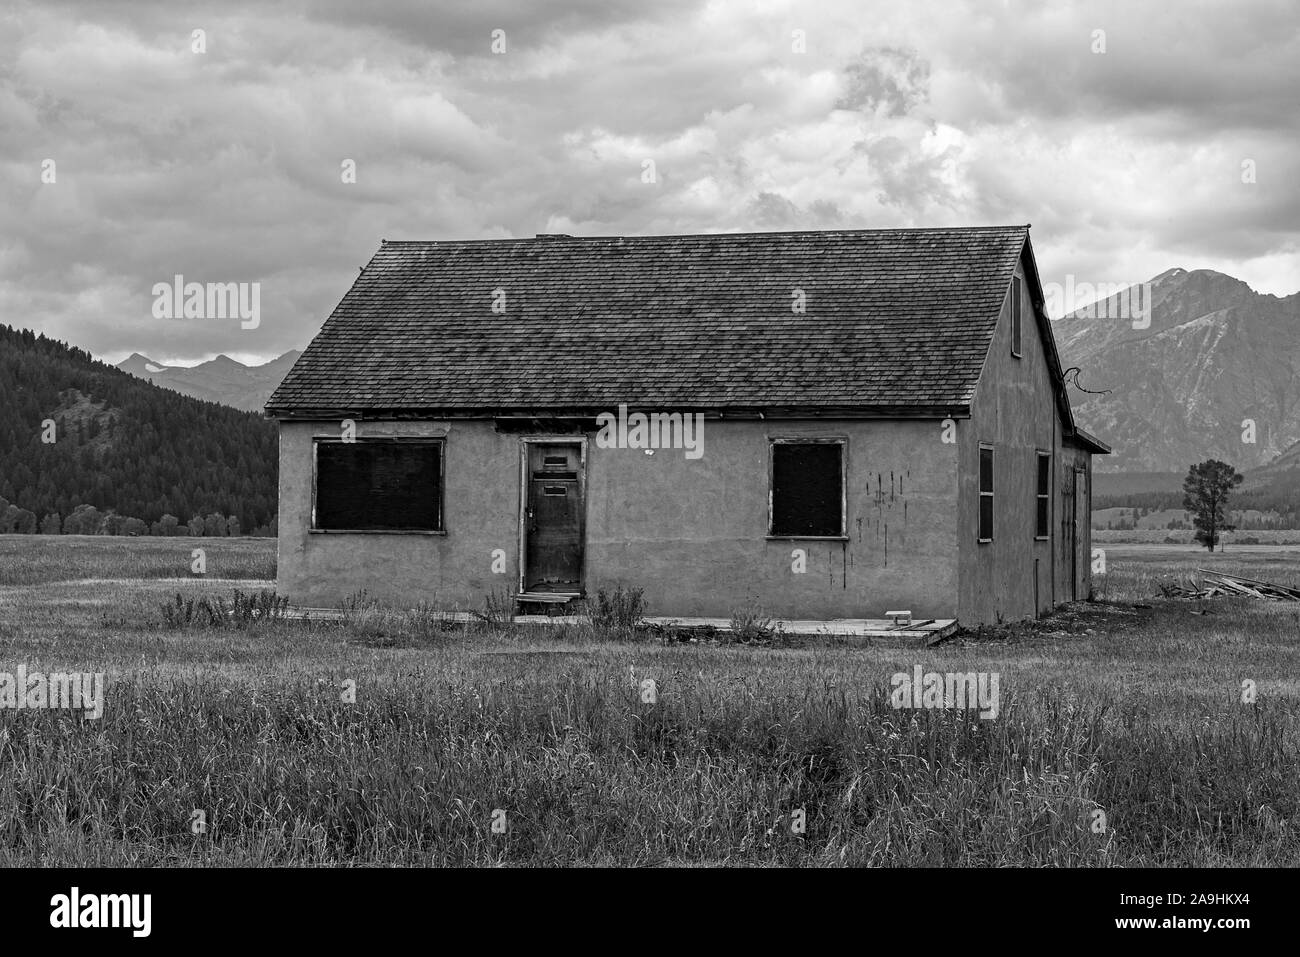 Old abandoned pioneer house in countryside under cloudy skies with mountains beyond, black and white. Stock Photo